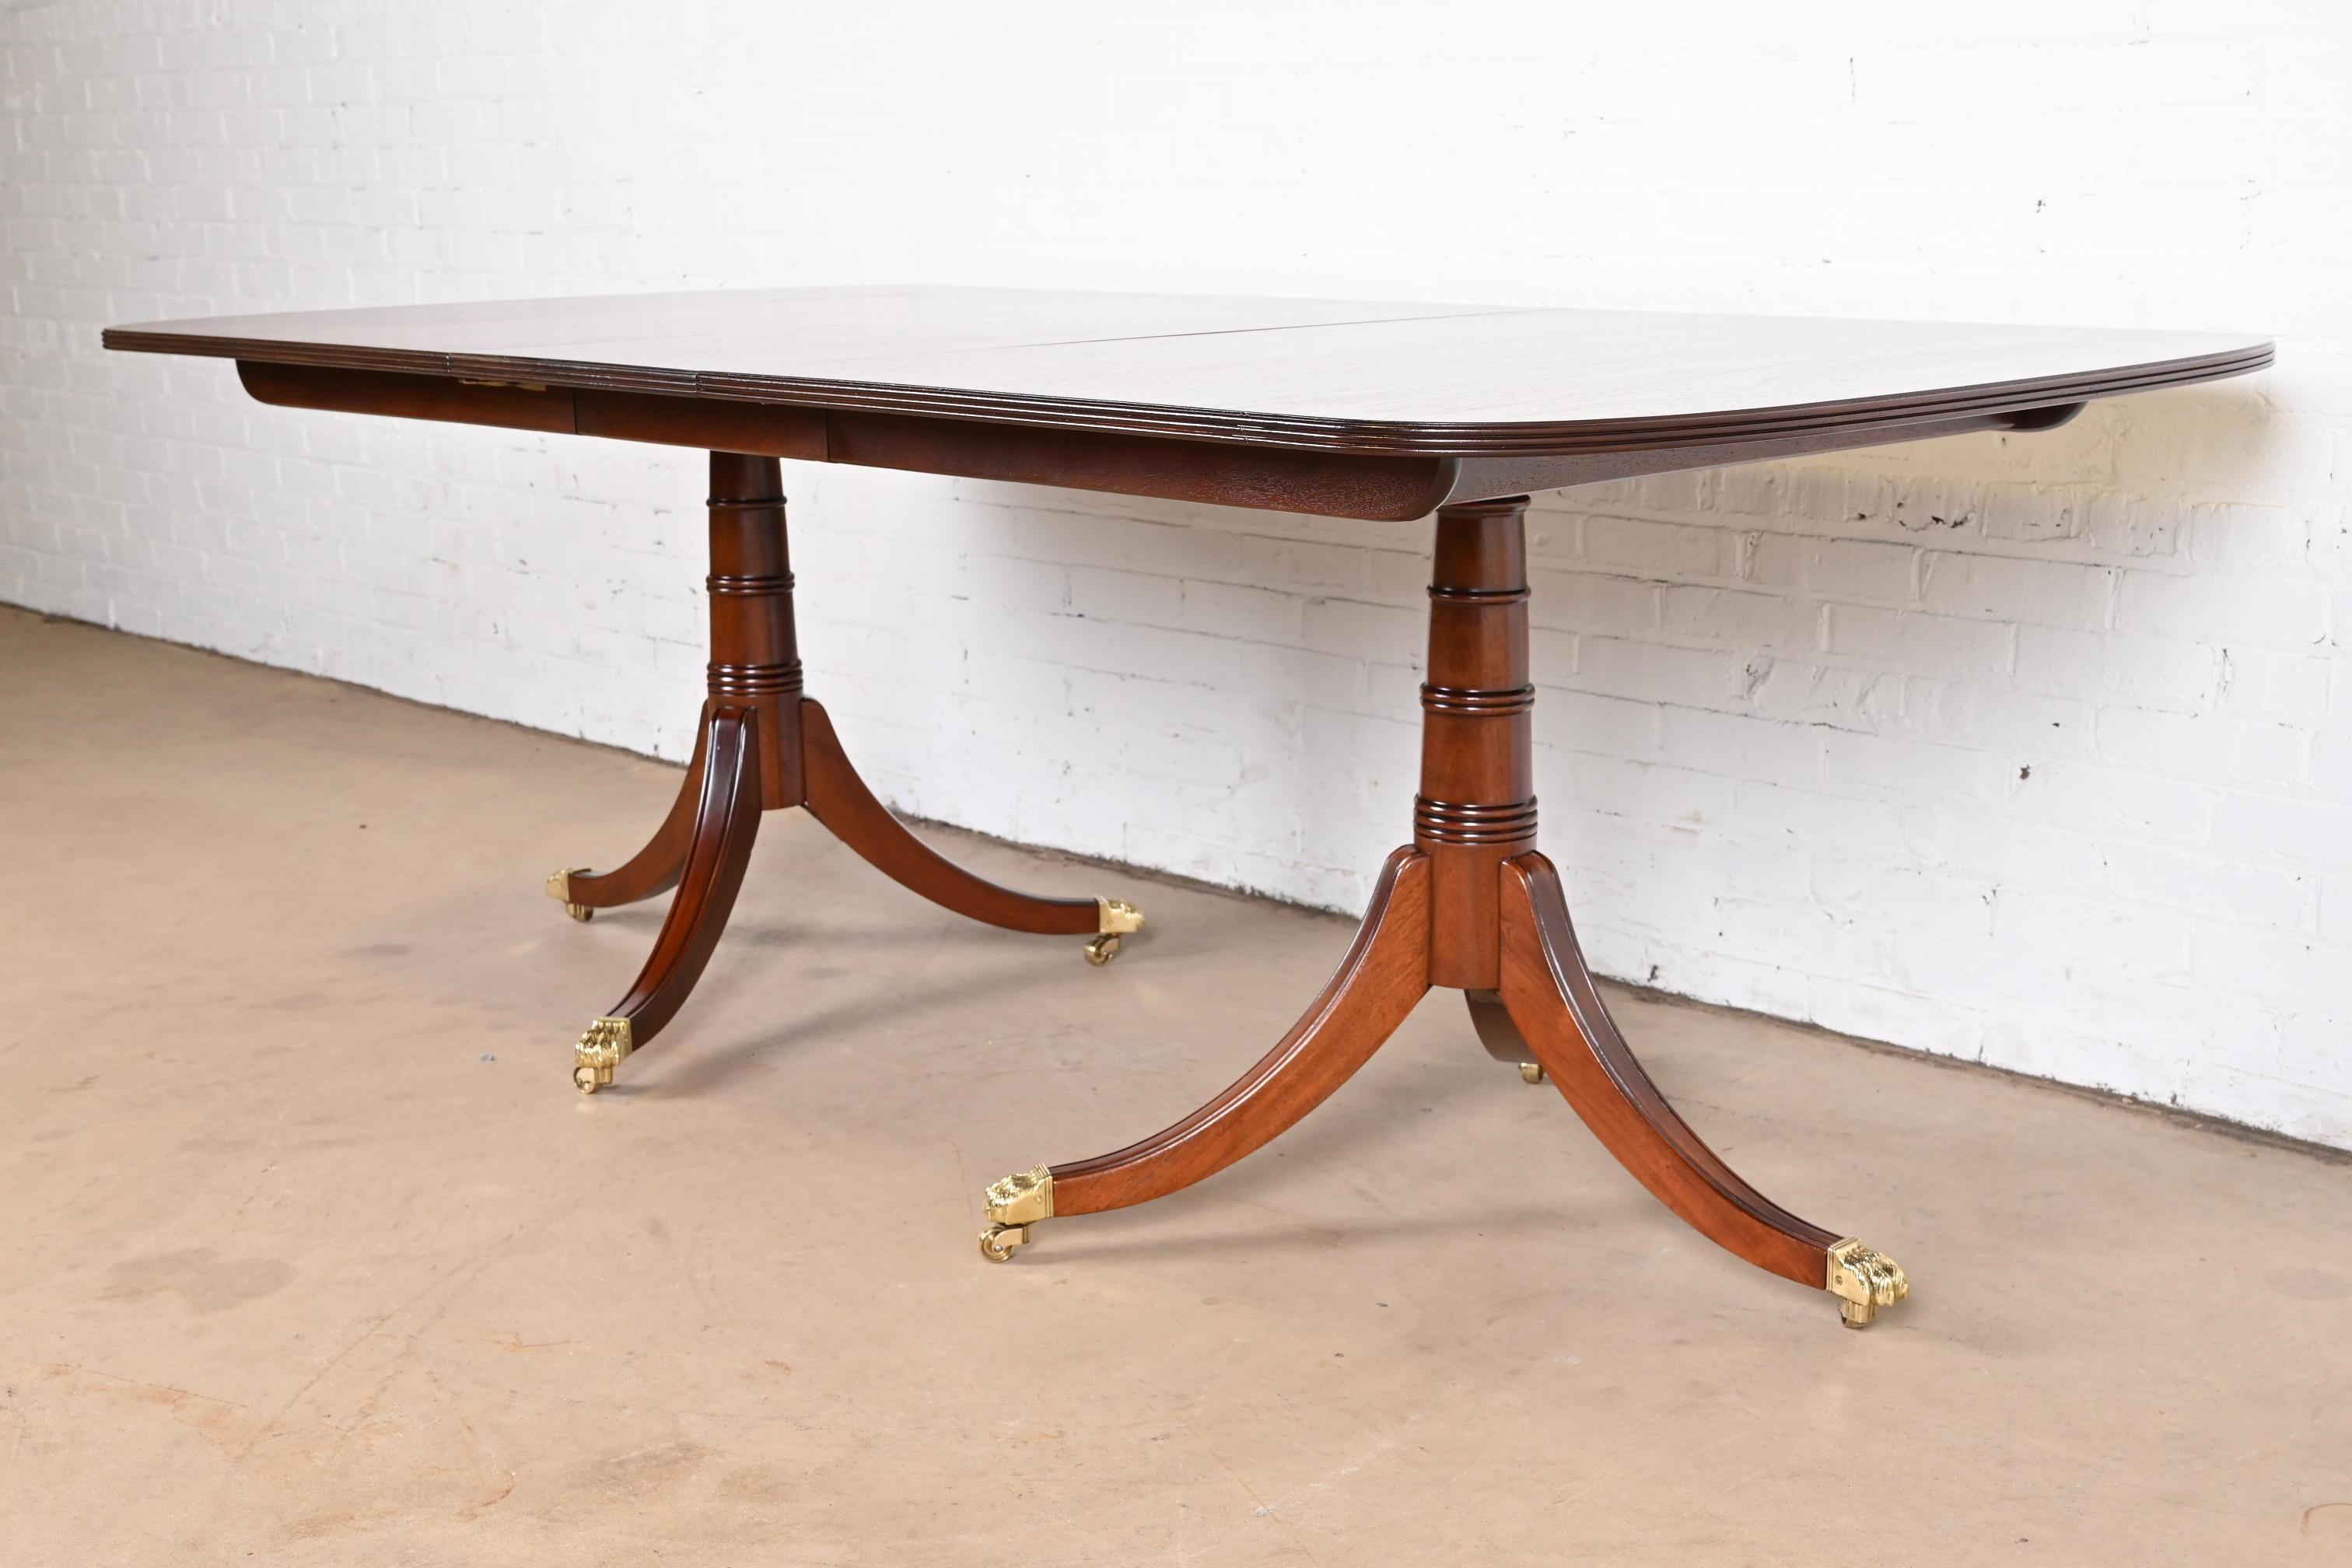 20th Century Stickley Georgian Mahogany Double Pedestal Dining Table, Newly Refinished